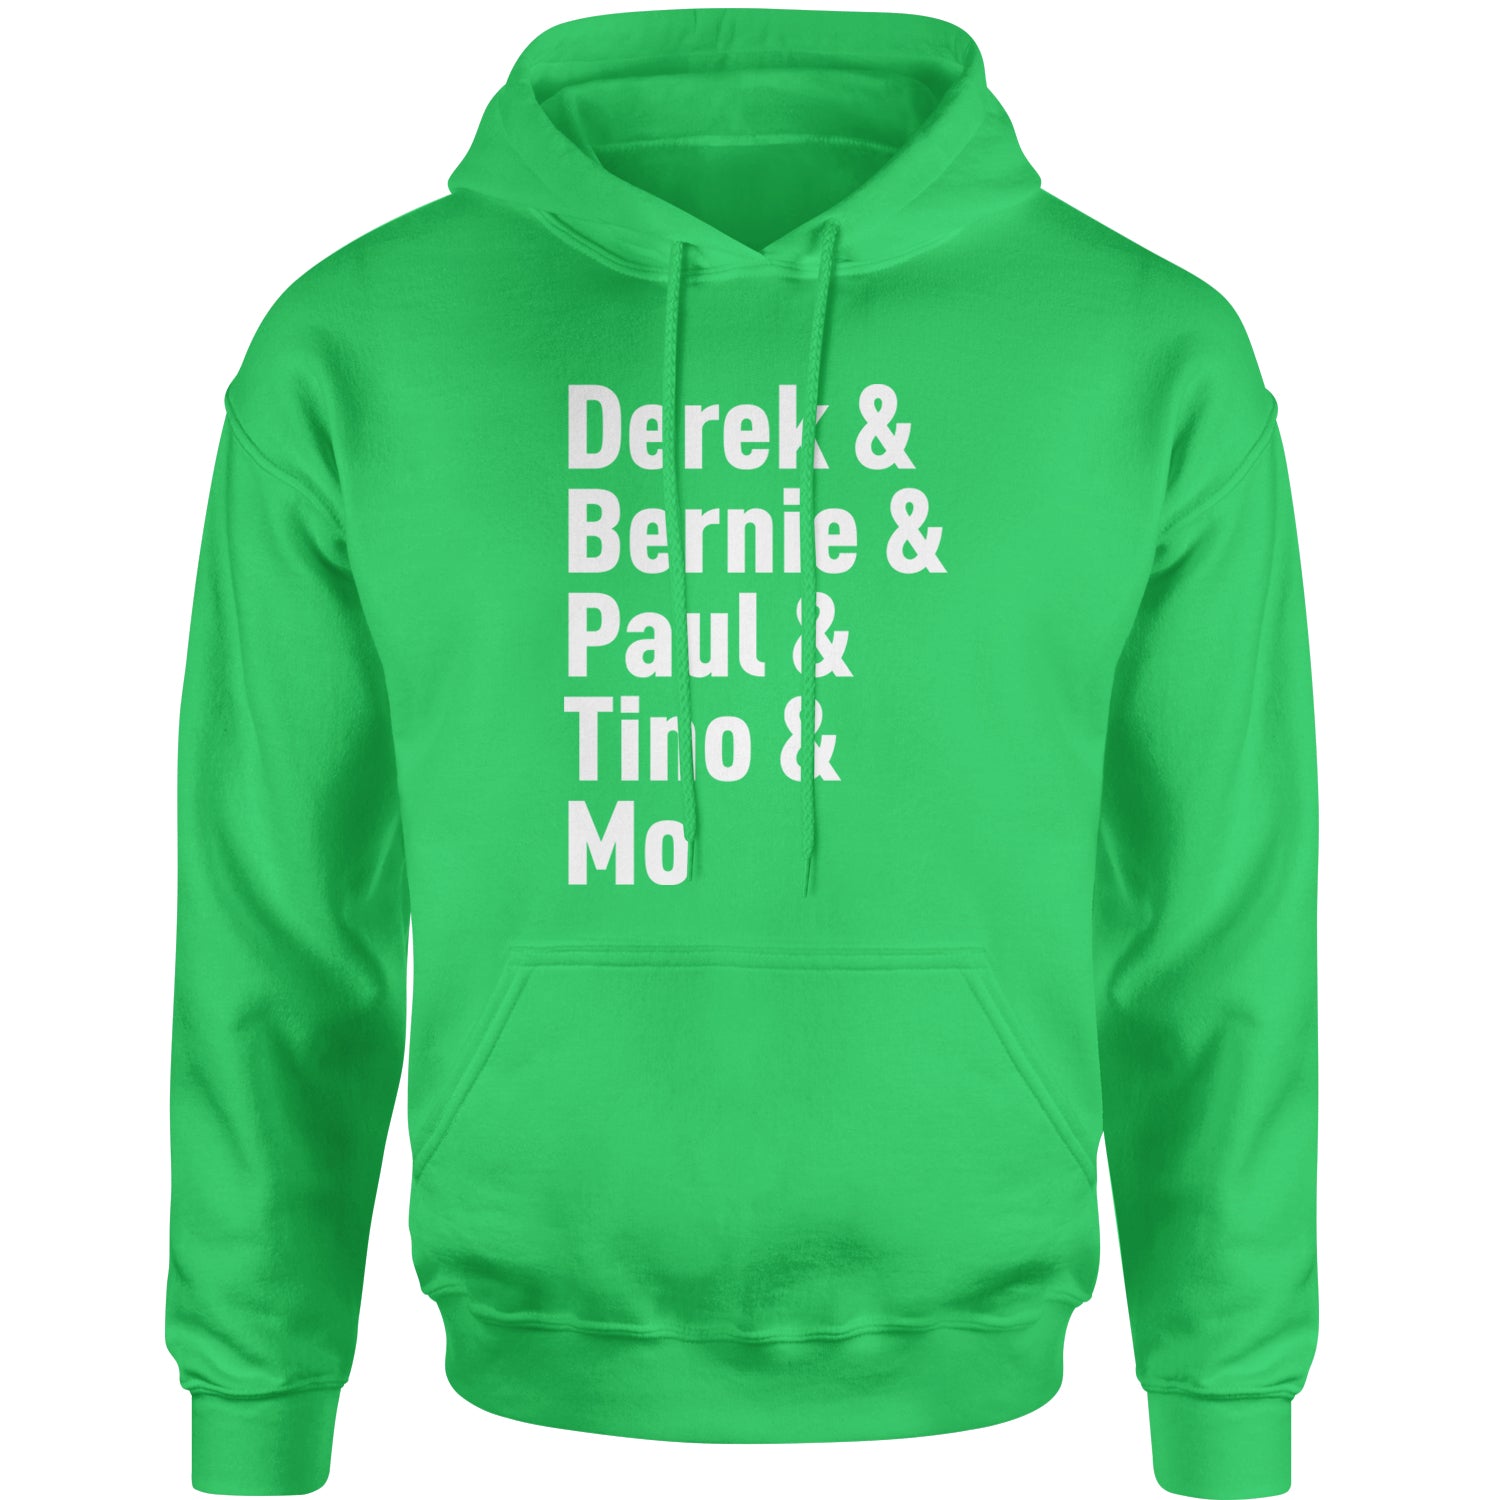 Derek and Bernie and Paul and Tino and Mo Adult Hoodie Sweatshirt baseball, comes, here, judge, the by Expression Tees